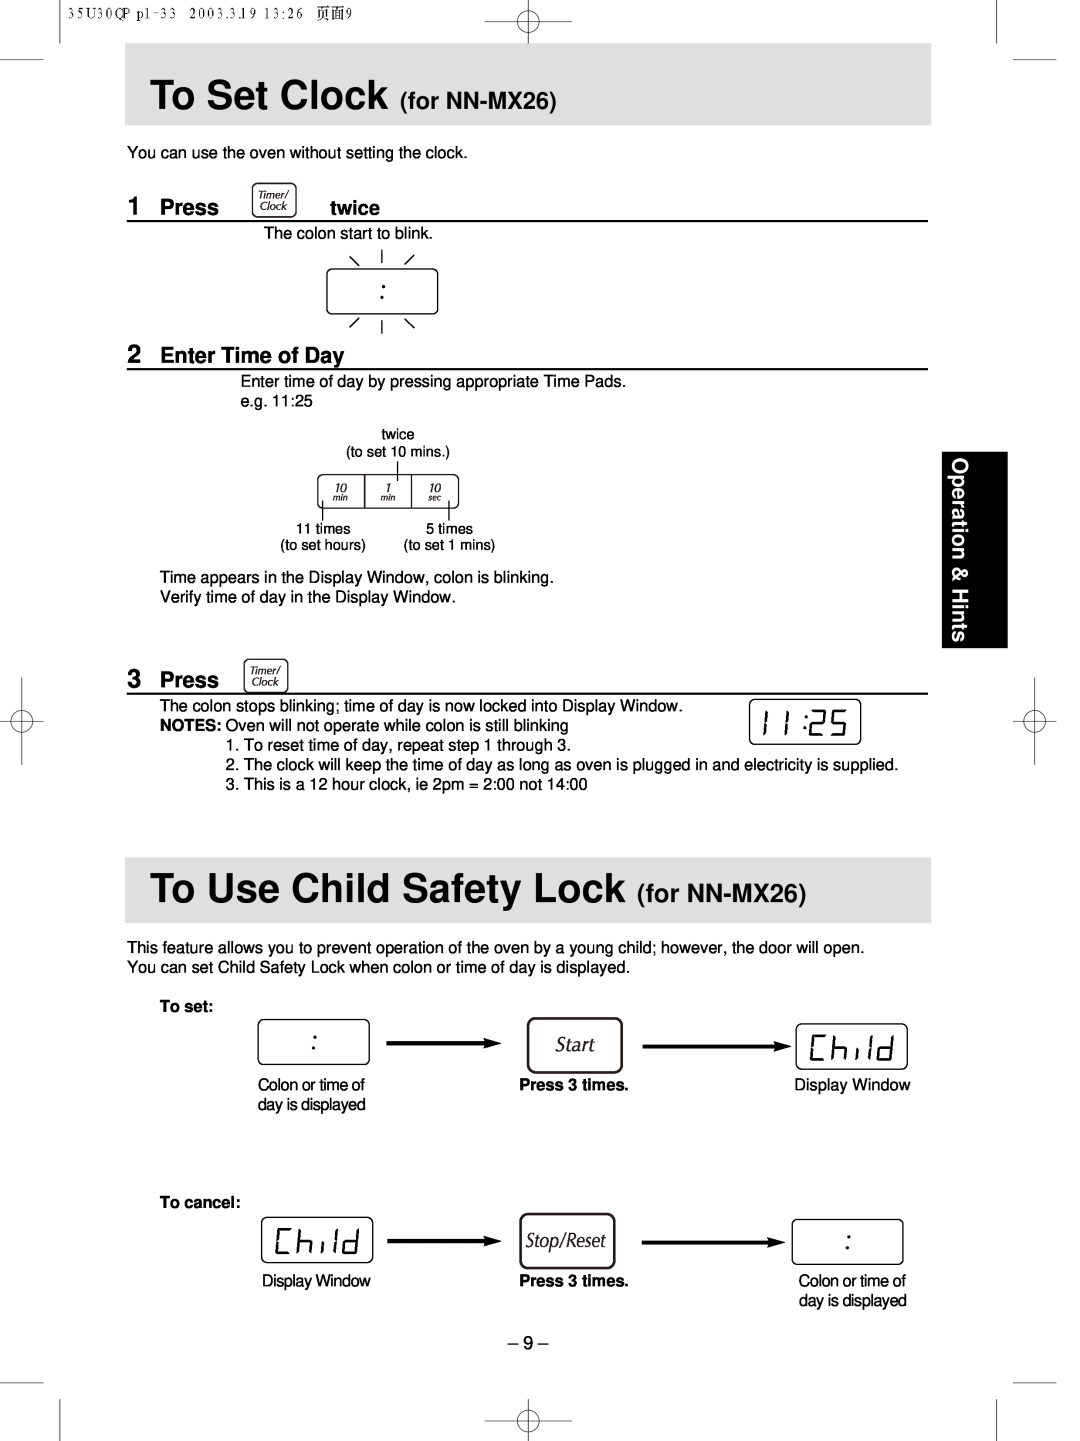 Panasonic NN-MX21 manual To Set Clock for NN-MX26, To Use Child Safety Lock for NN-MX26, Press, Enter Time of Day, twice 